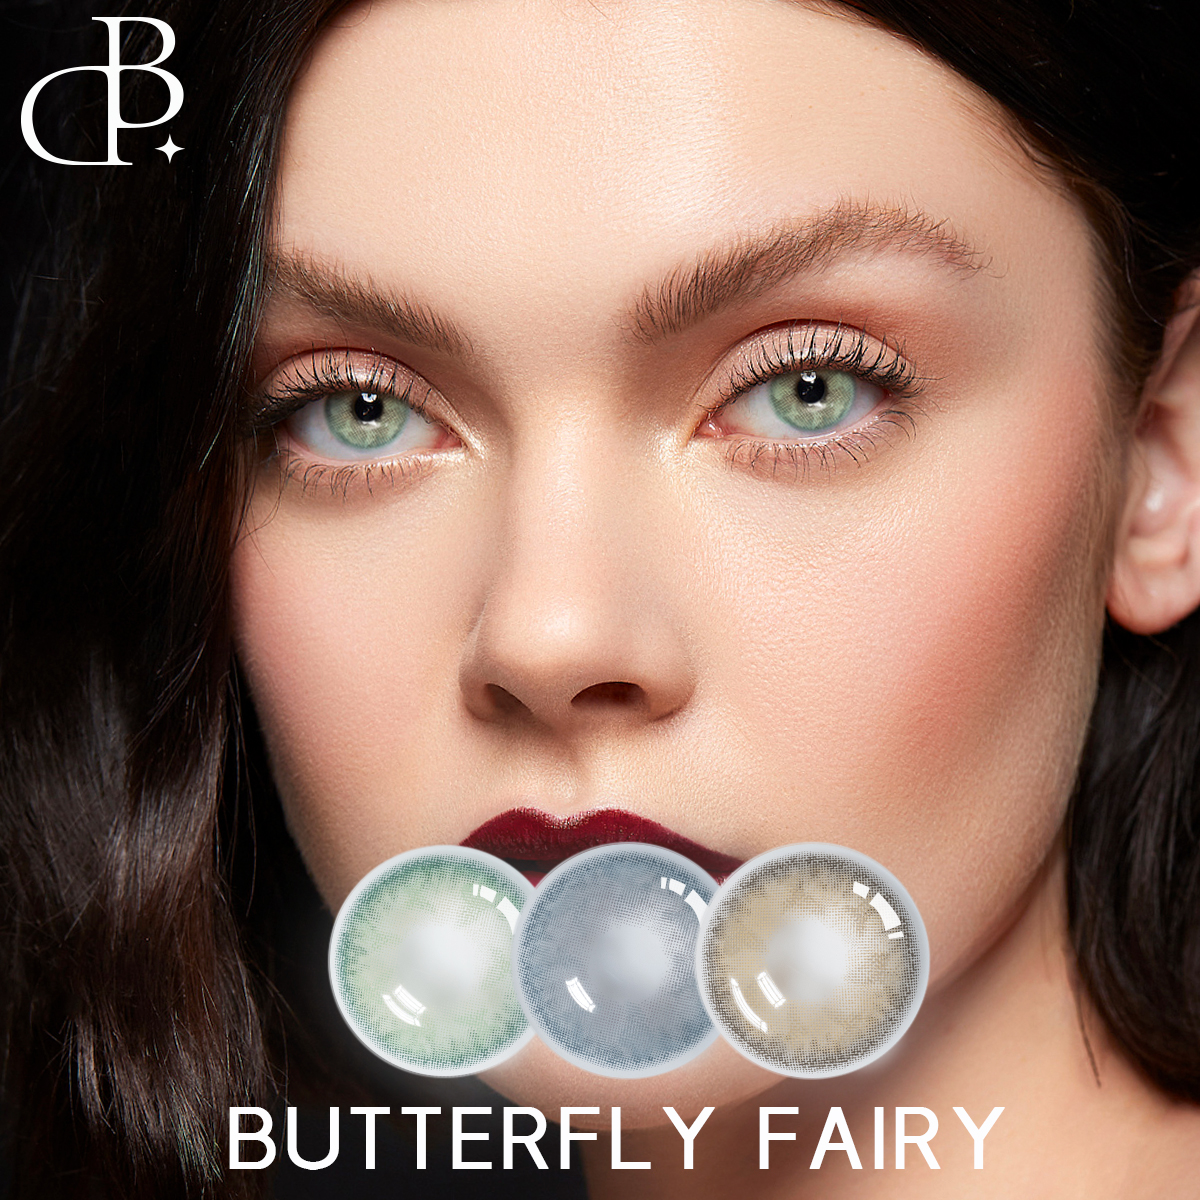 BUTTERFLY FAIRY dbeyes contact lens bag-ong abot nga color contact lens soft lens size 14.00mm contact lens hot selling cosmetic